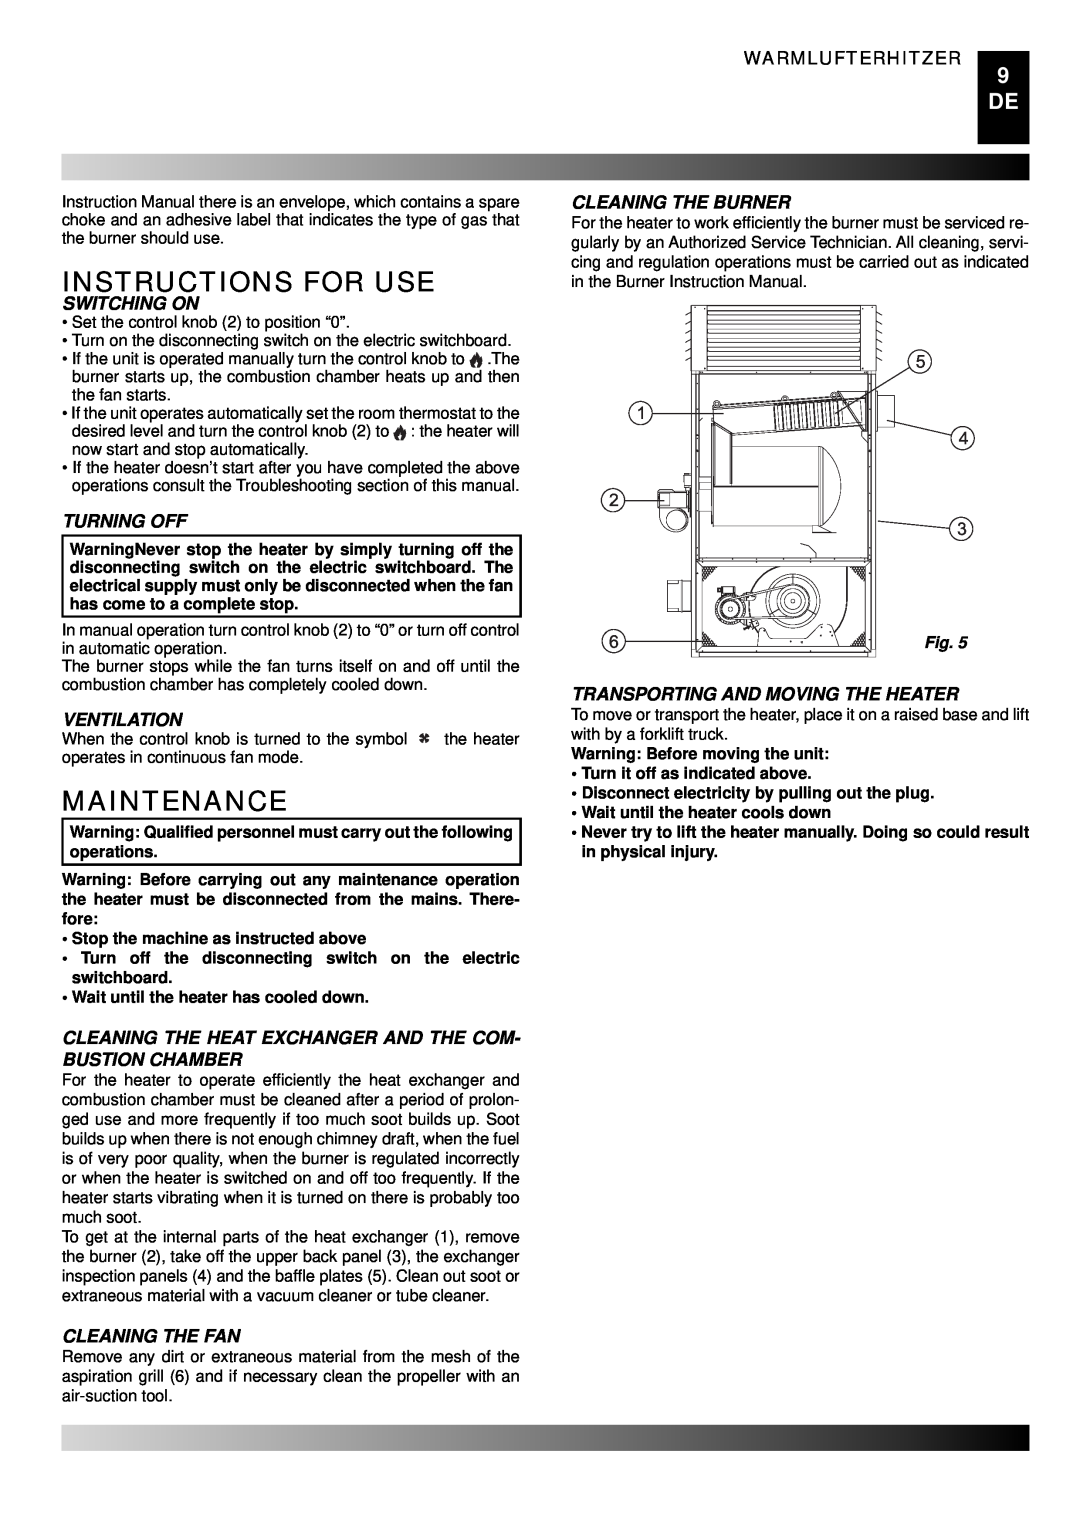 Master Lock BG 100, BG 150 Instructions For Use, Maintenance, Switching On, Turning Off, Ventilation, Cleaning The Fan 